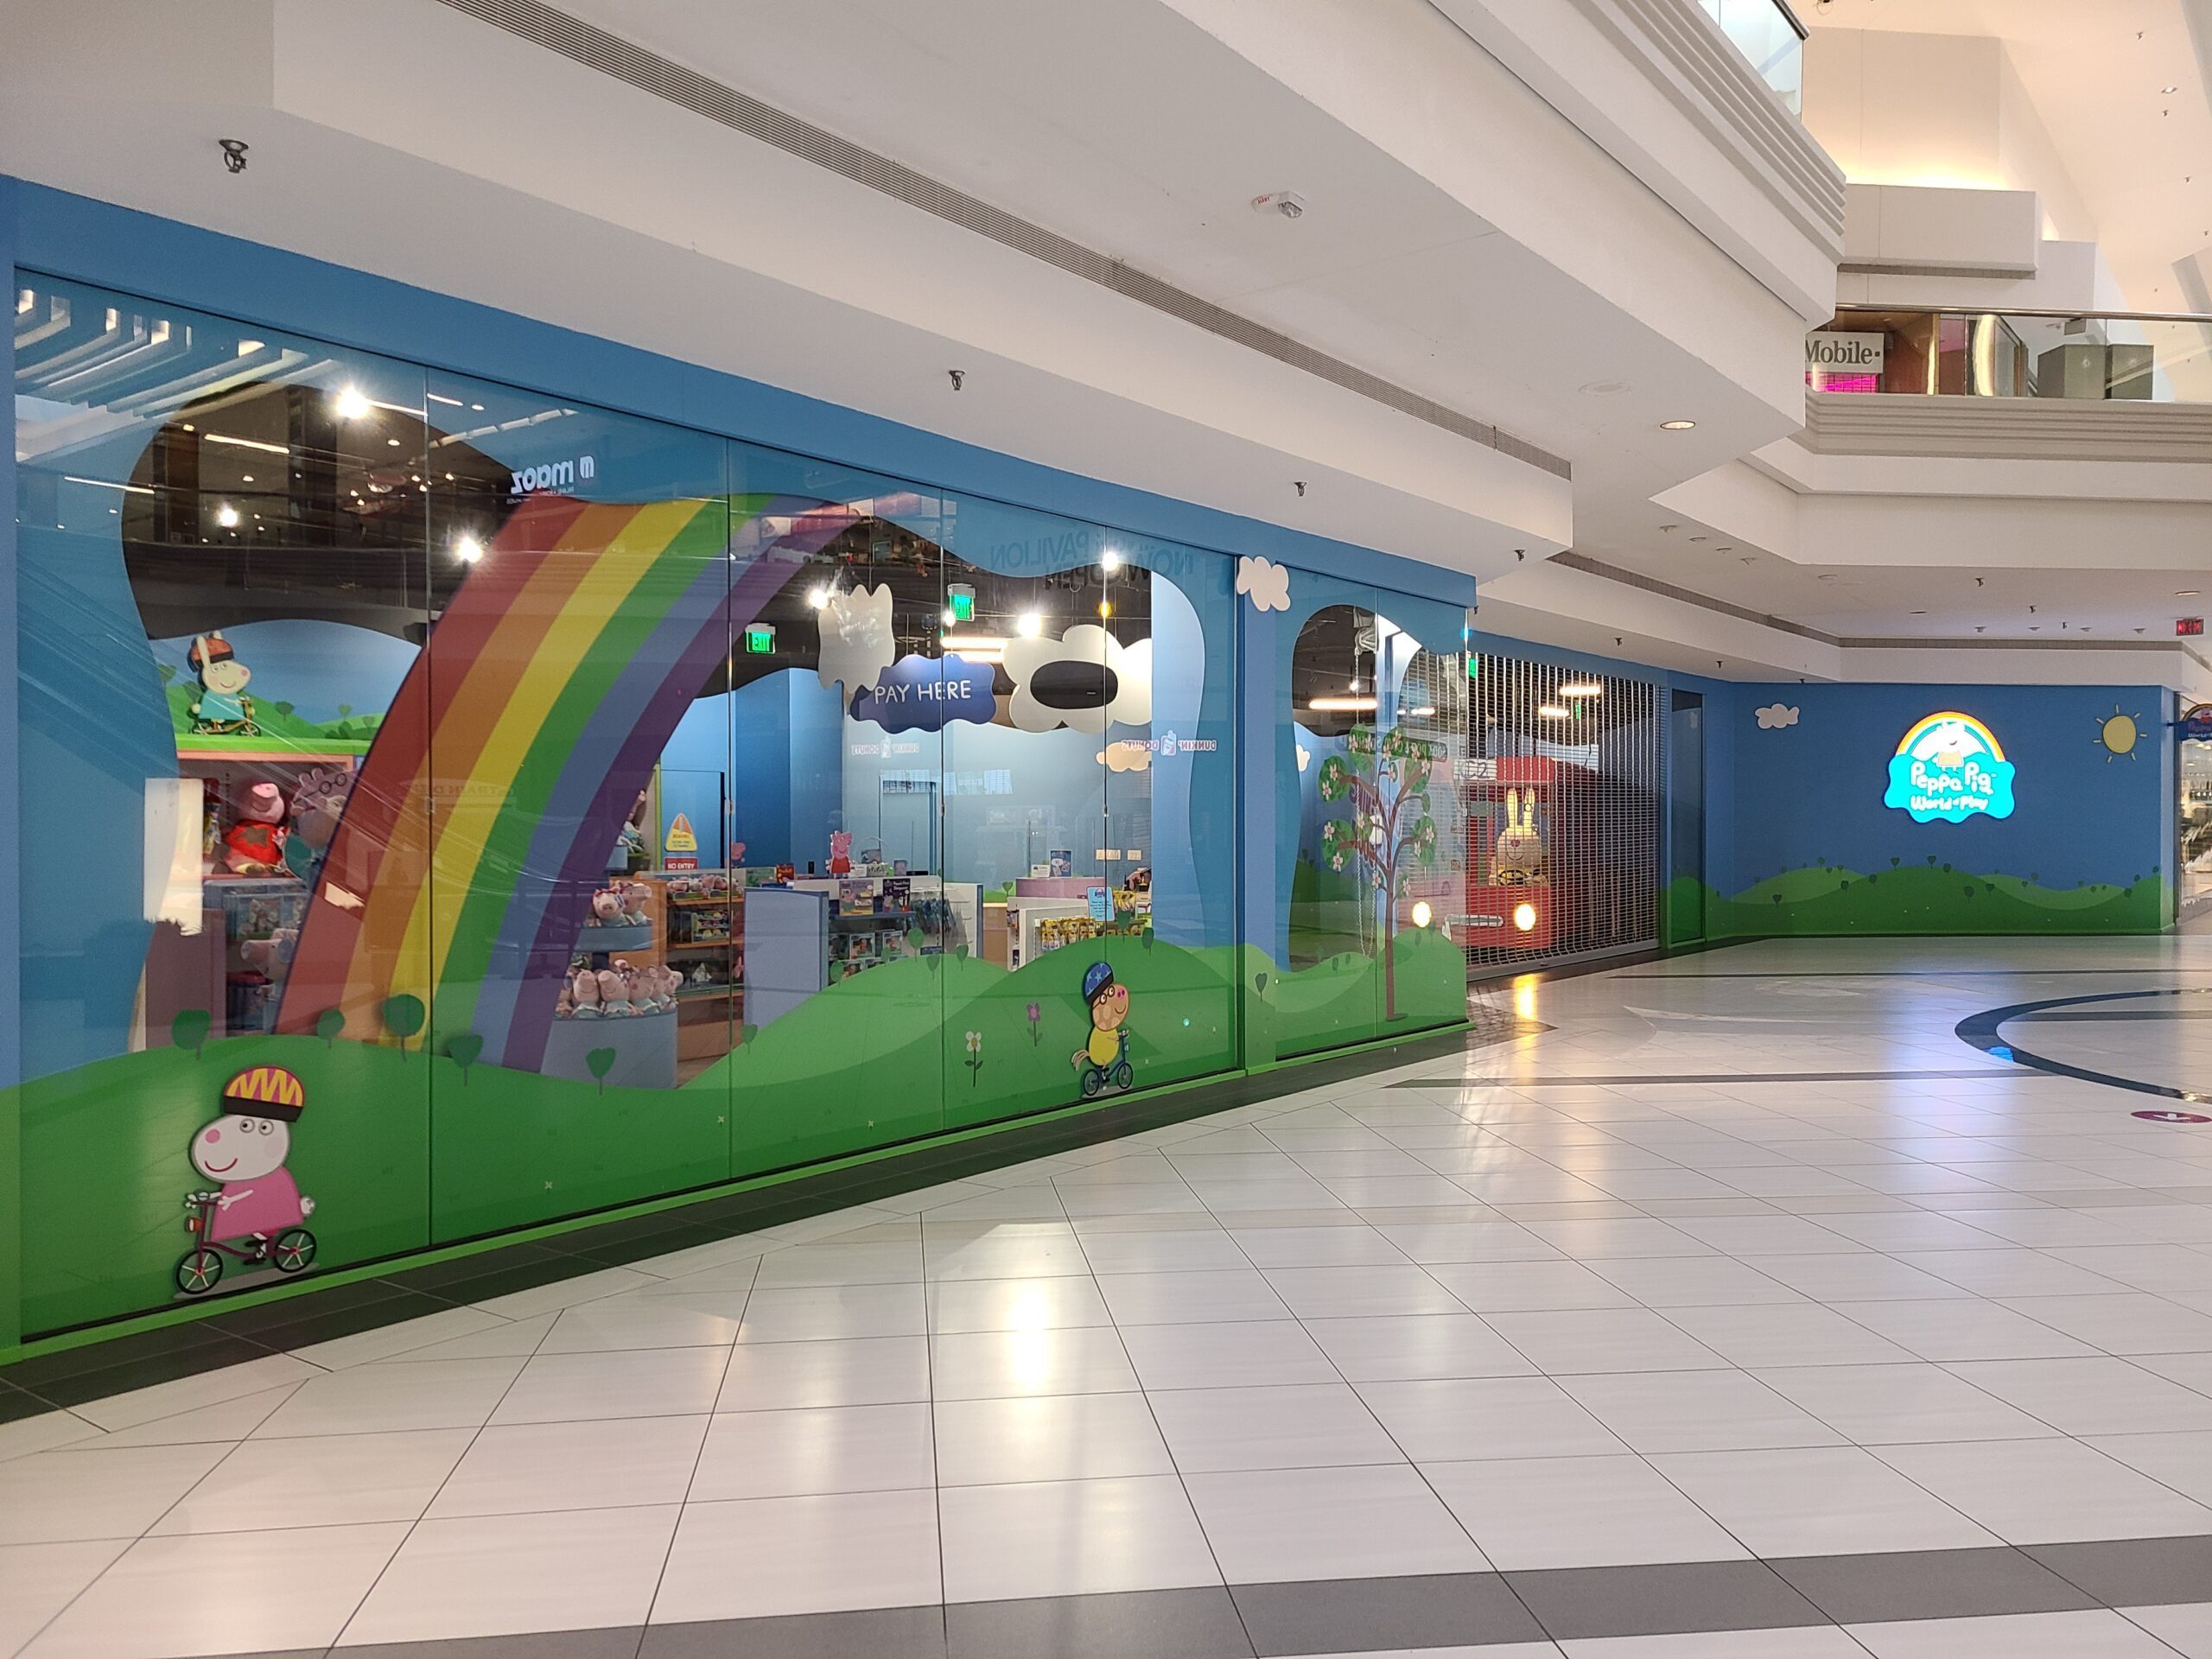 Woodfield Mall replaces Rainforest Cafe with Peppa Pig